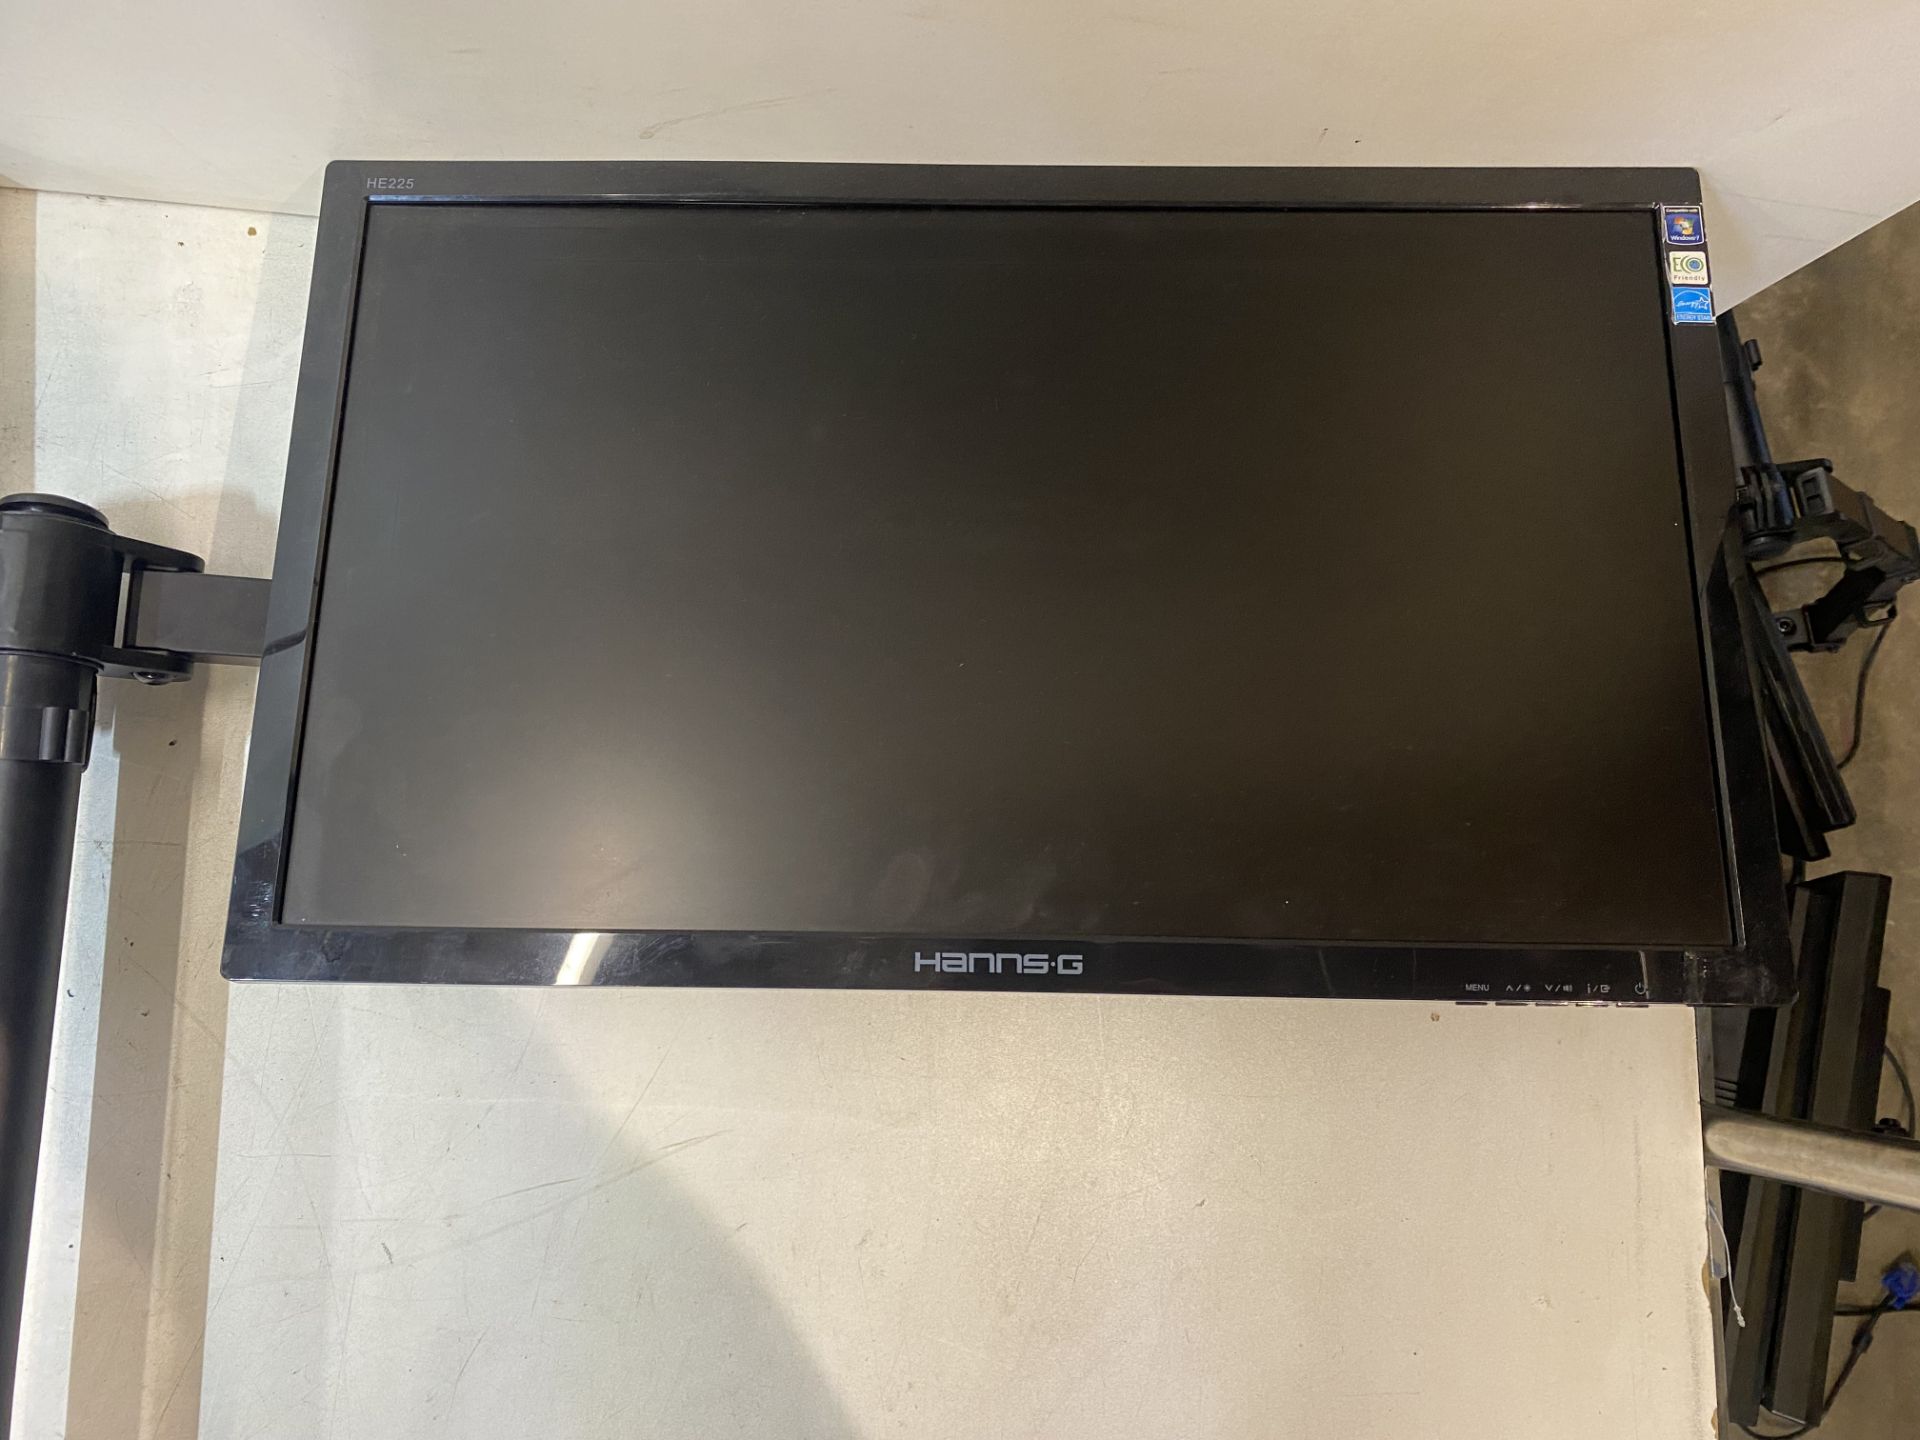 6 x Hanns G He225 21.5" LED LCD Monitors With Desk Mounted Monitor Stands - Image 3 of 17